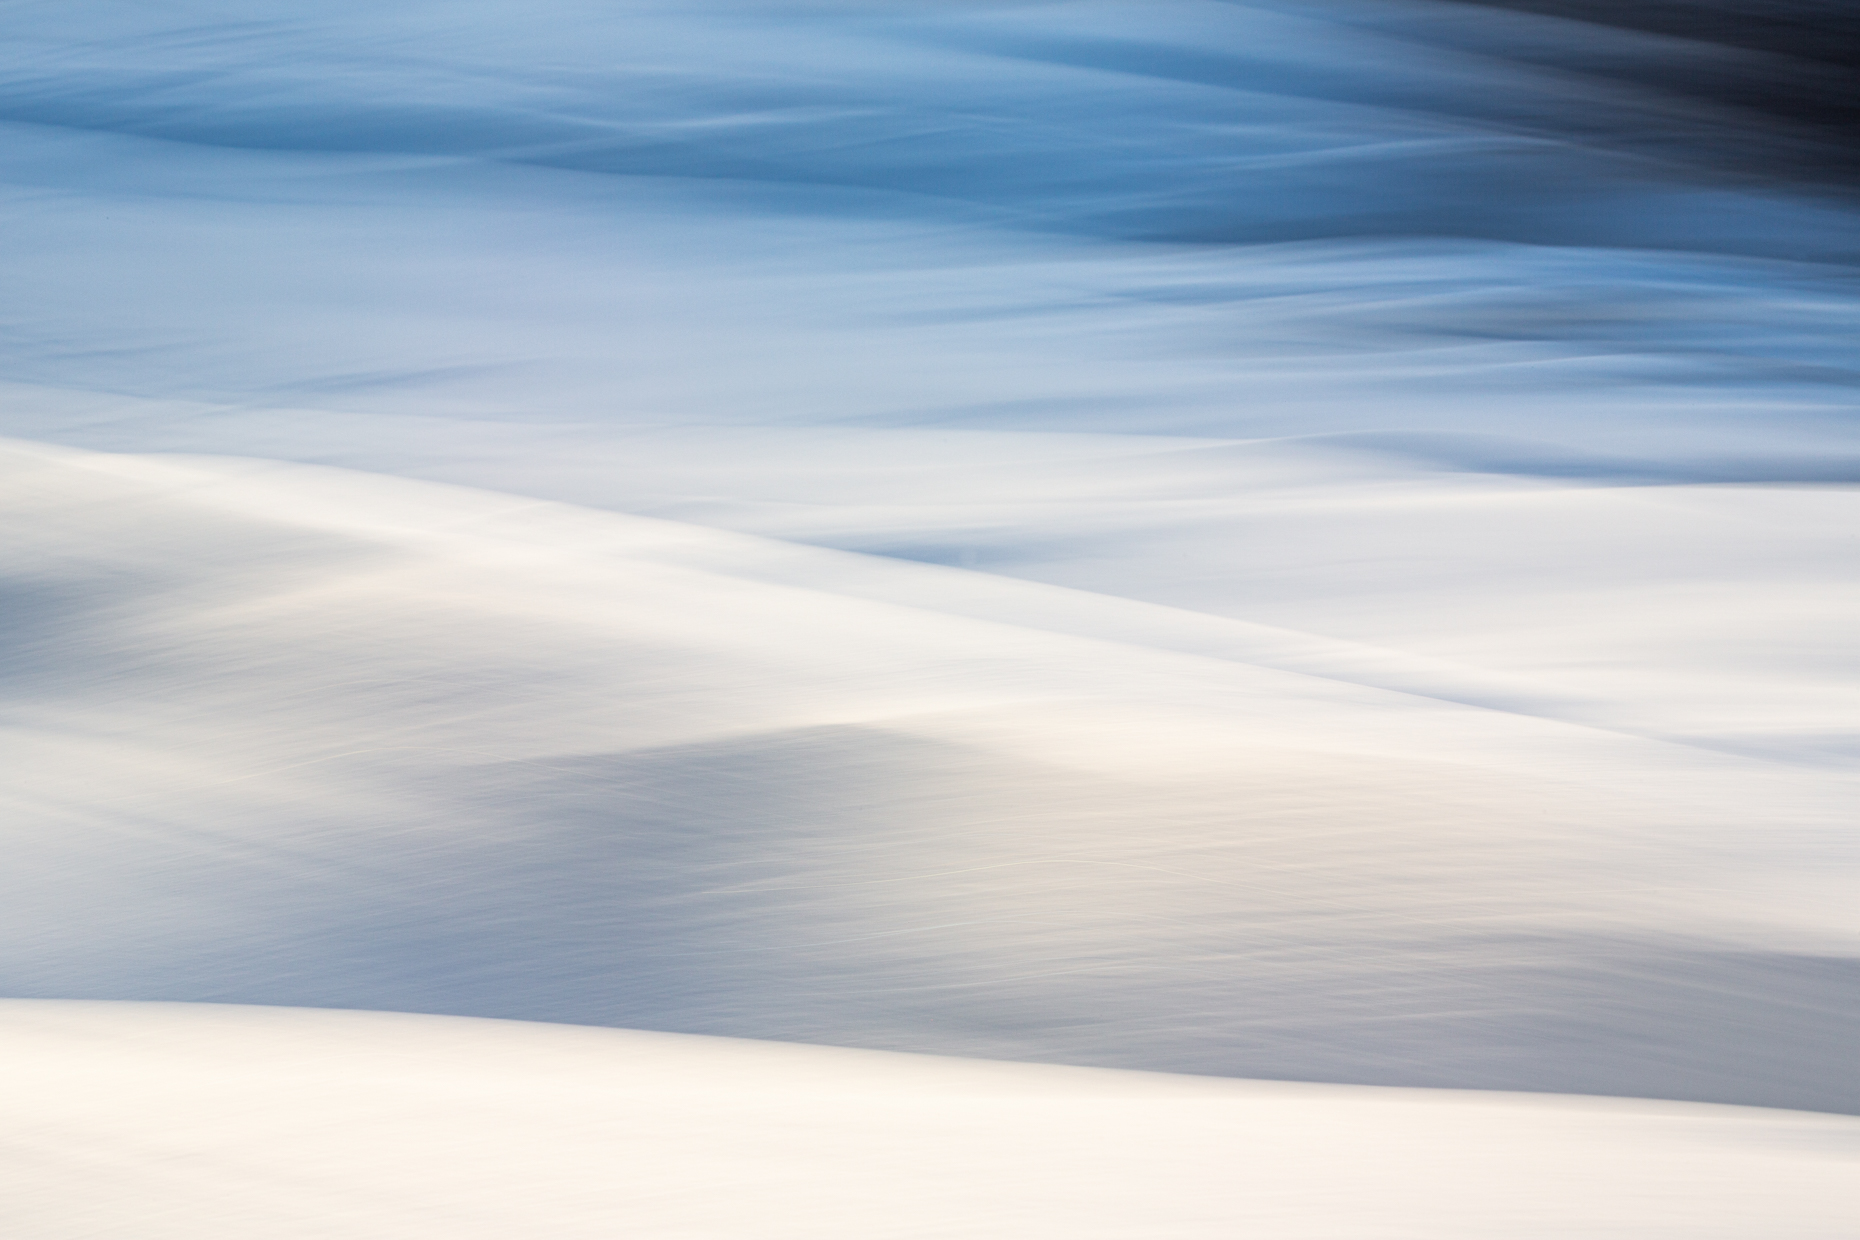 BECOMING_RIVER_ICM_GRIEF_CLIMATE_CHANGE_WINTER_ICE_SAINT_LAWRENCE_RIVER_QUEBEC_CANADA-3